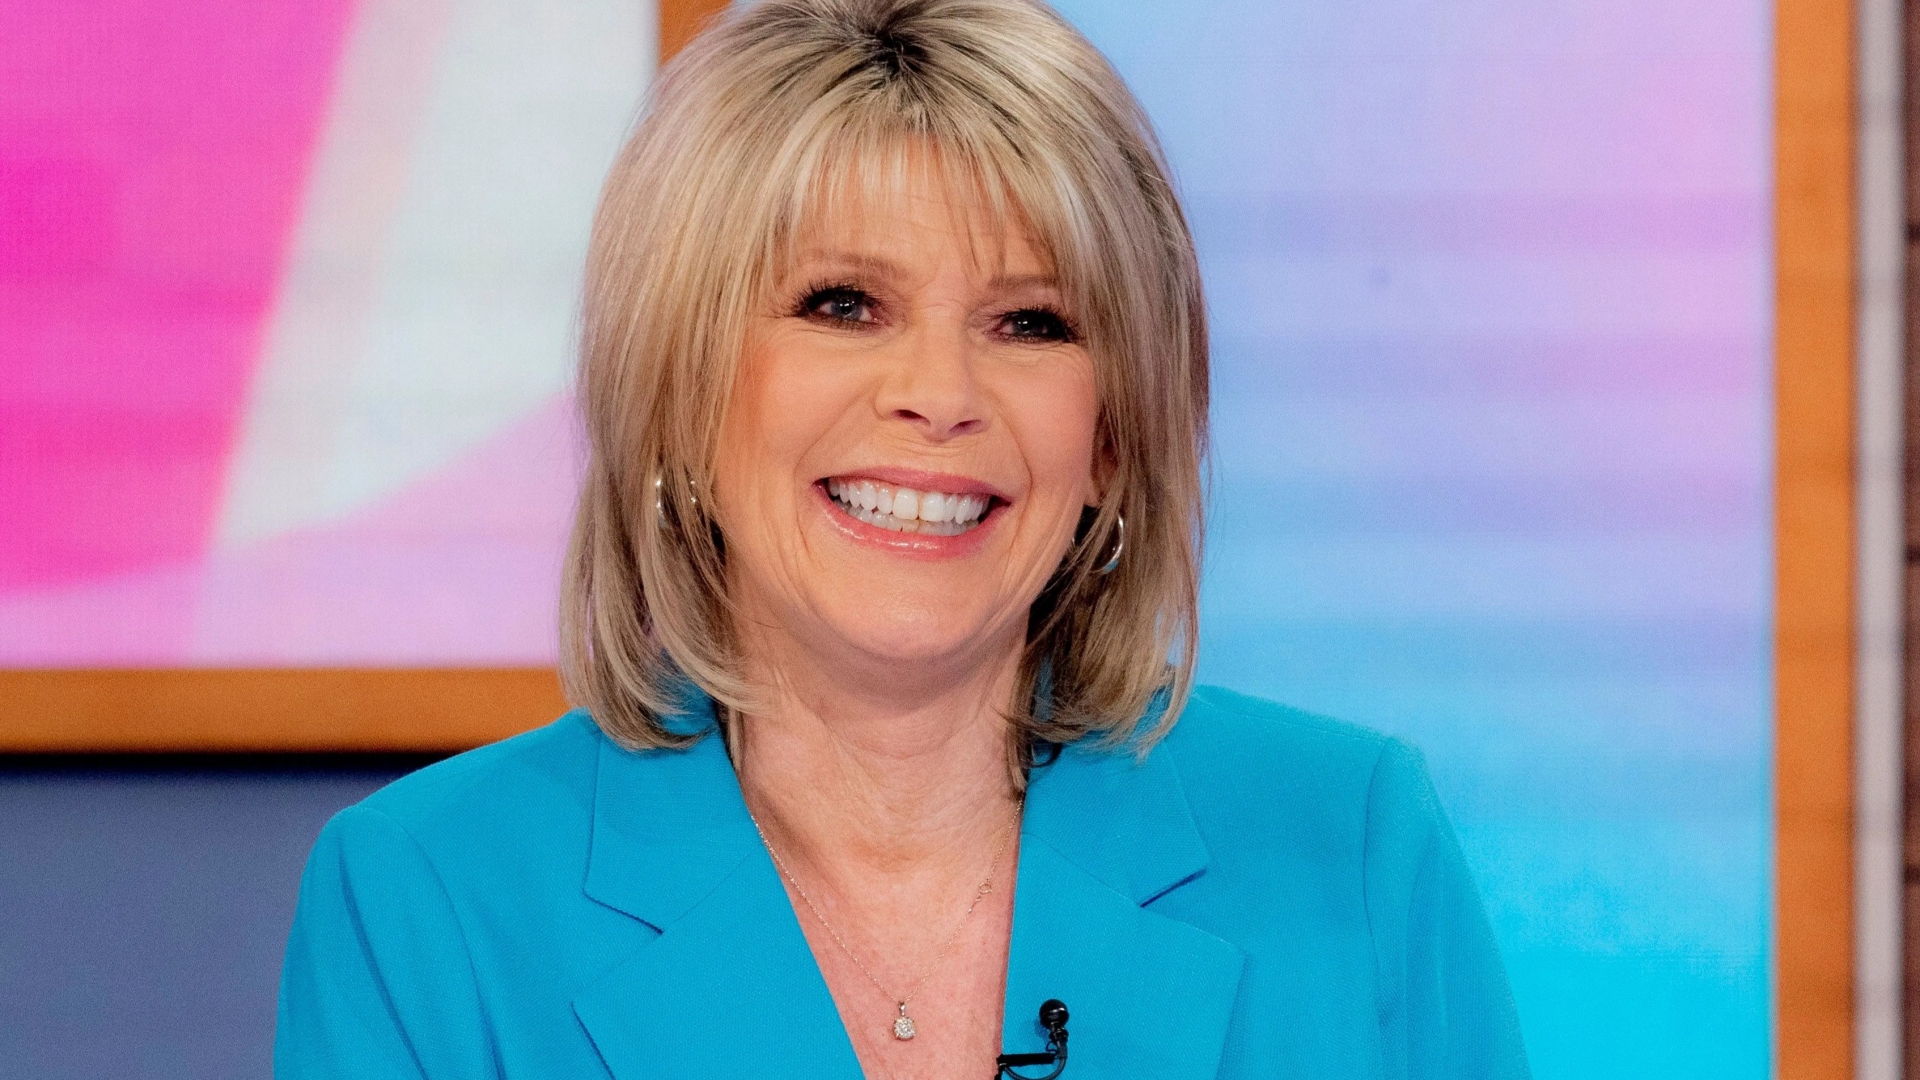 ITV has made a major update to Loose women as part of today’s schedule shakeup.